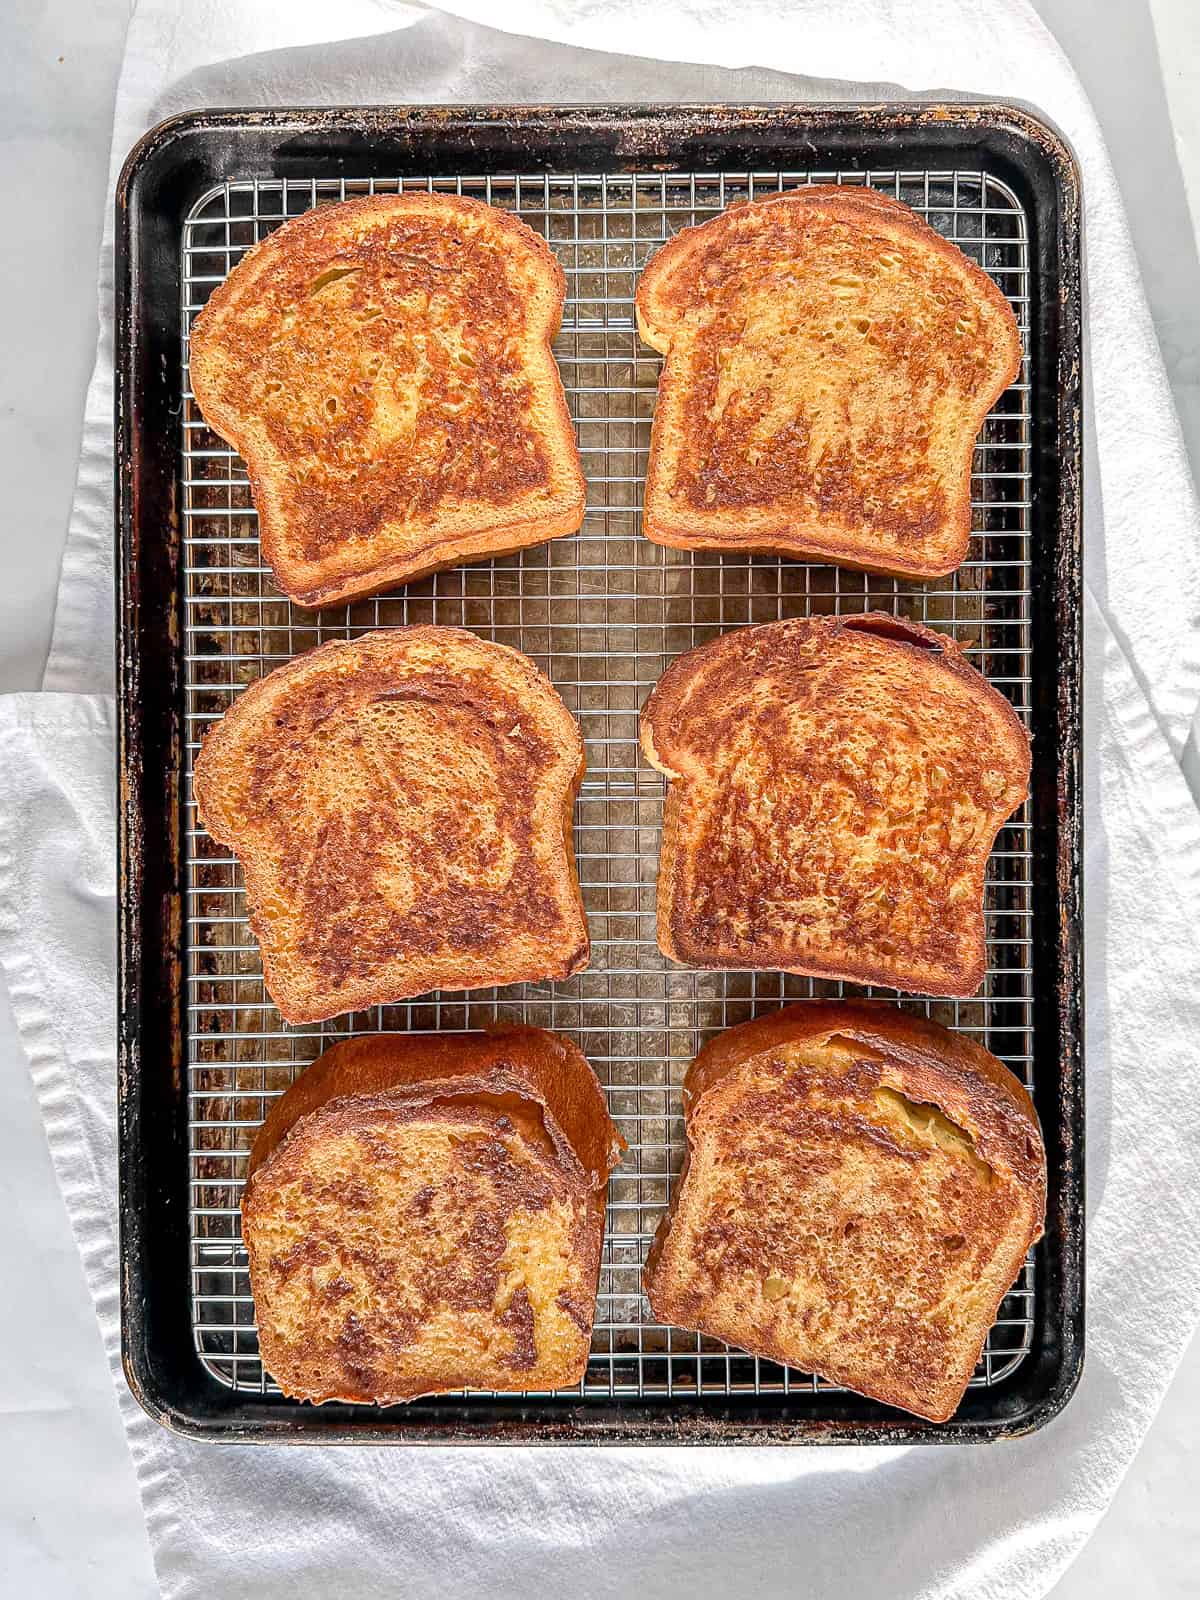 Six slices of eggnog French toast on a wire, wrapped placed in a large sheet pan.